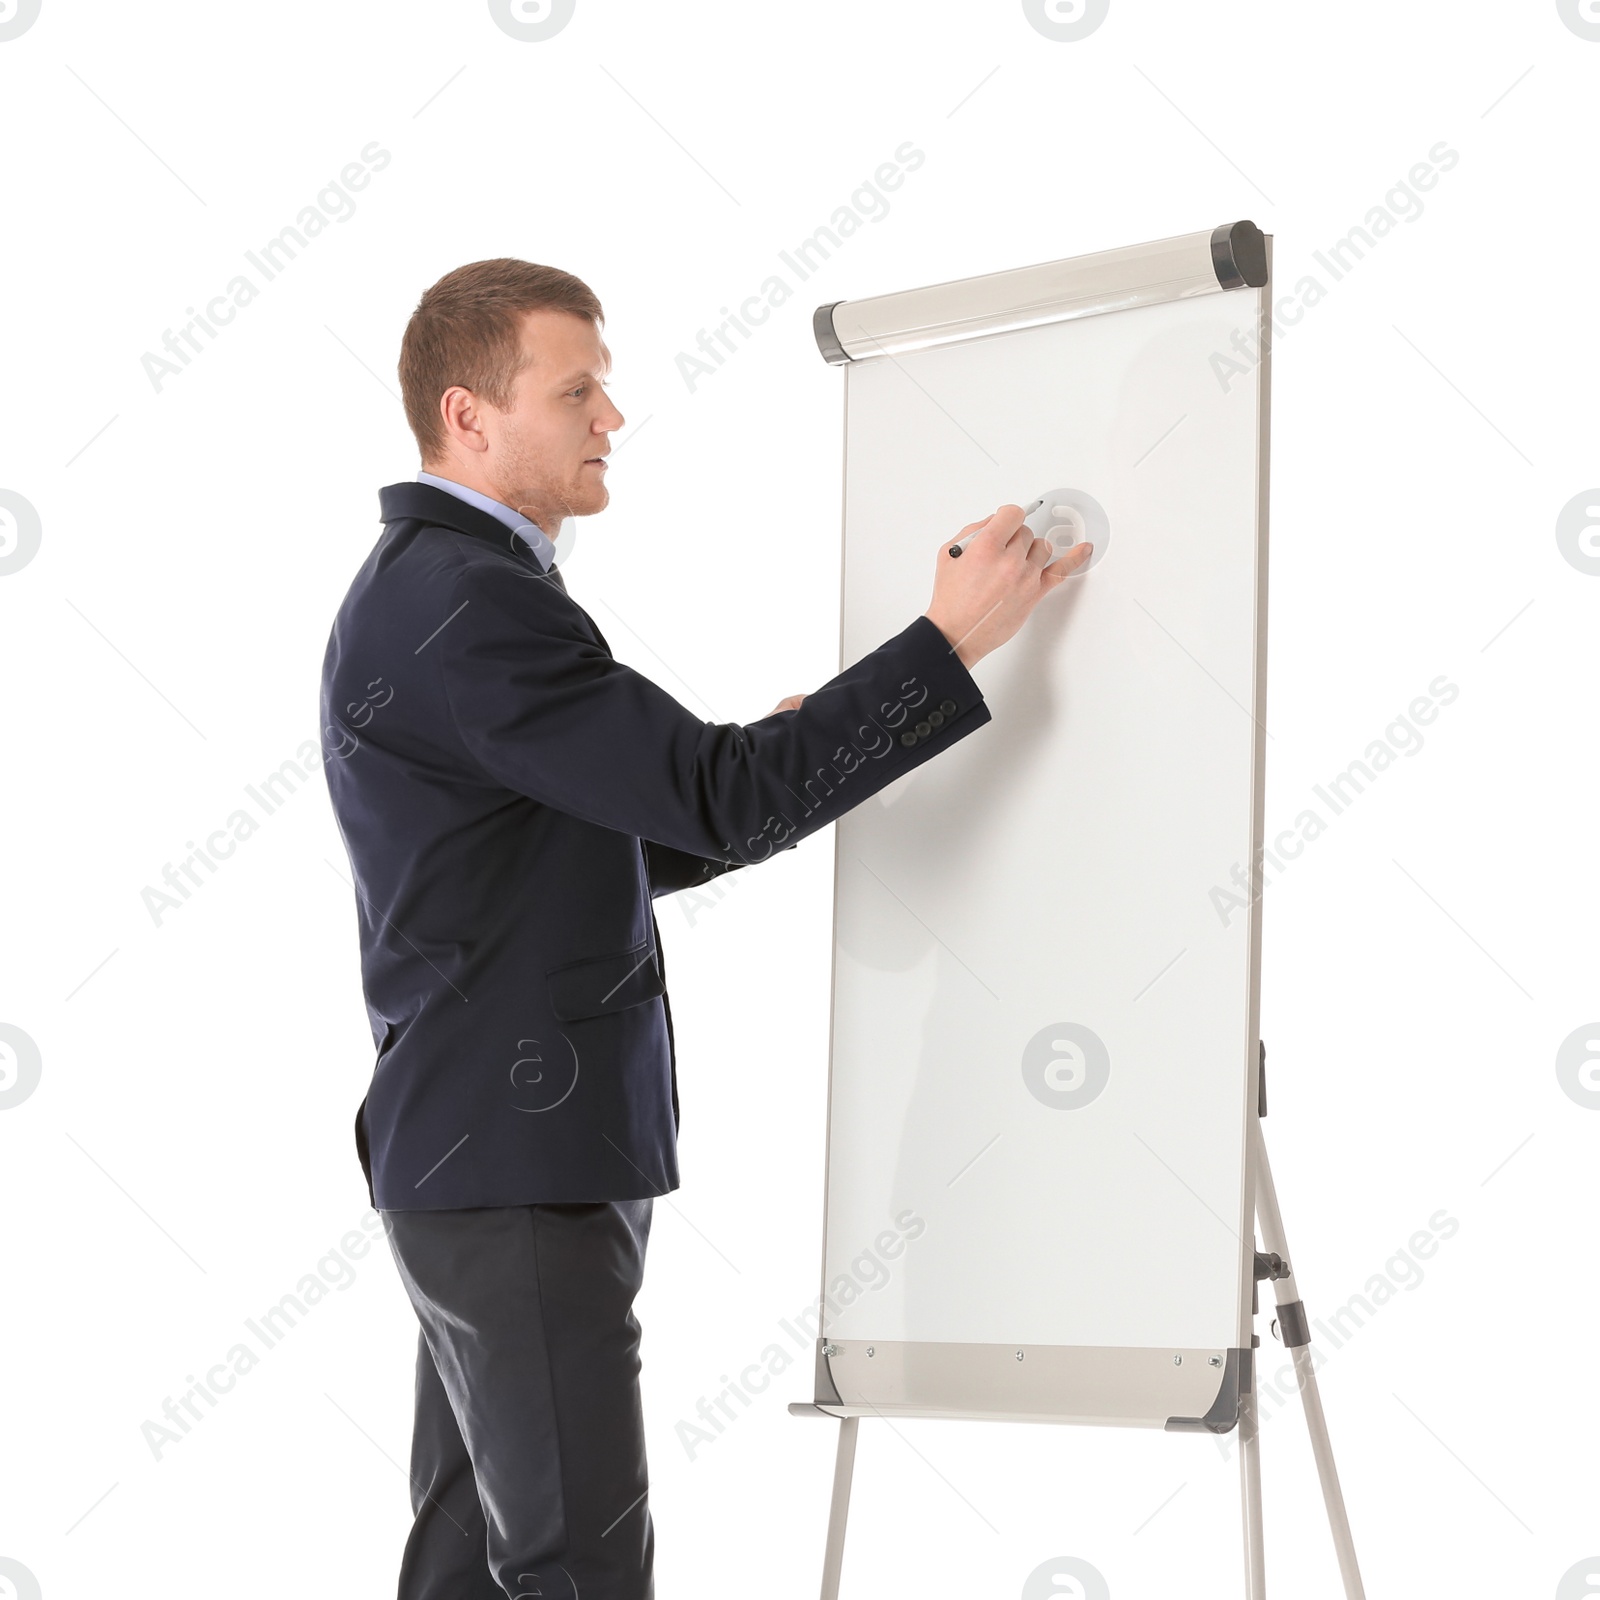 Photo of Business trainer giving presentation on flip chart board against white background